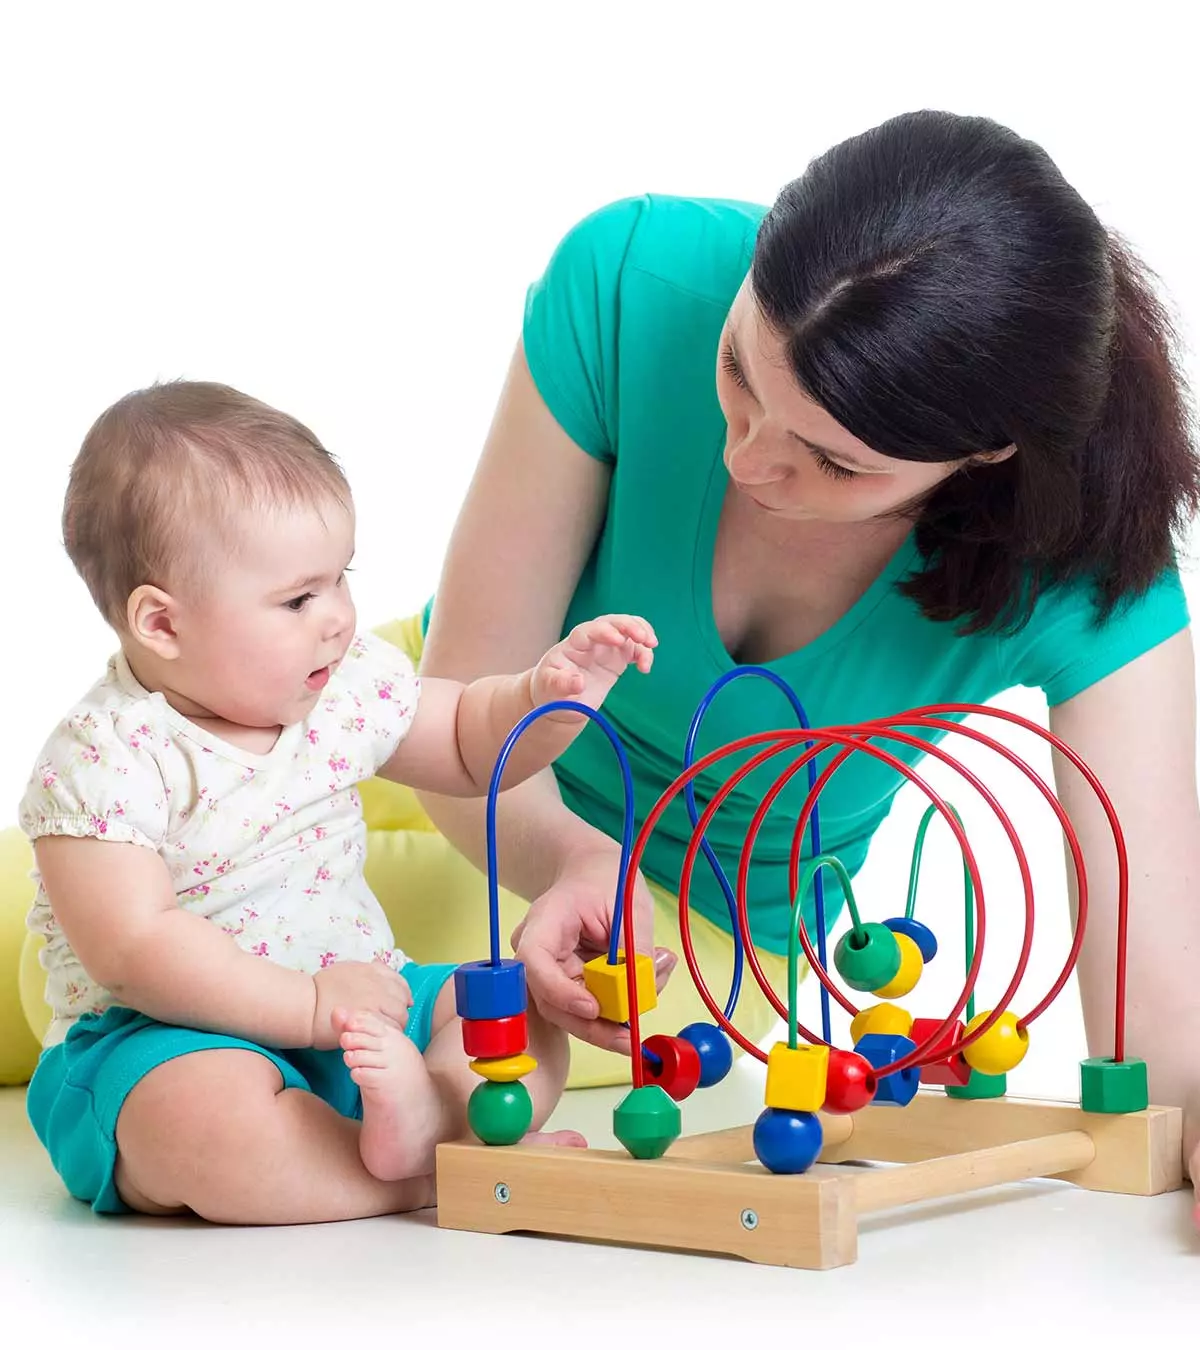 4 Learning Activities For Your 10-Month-Old Baby